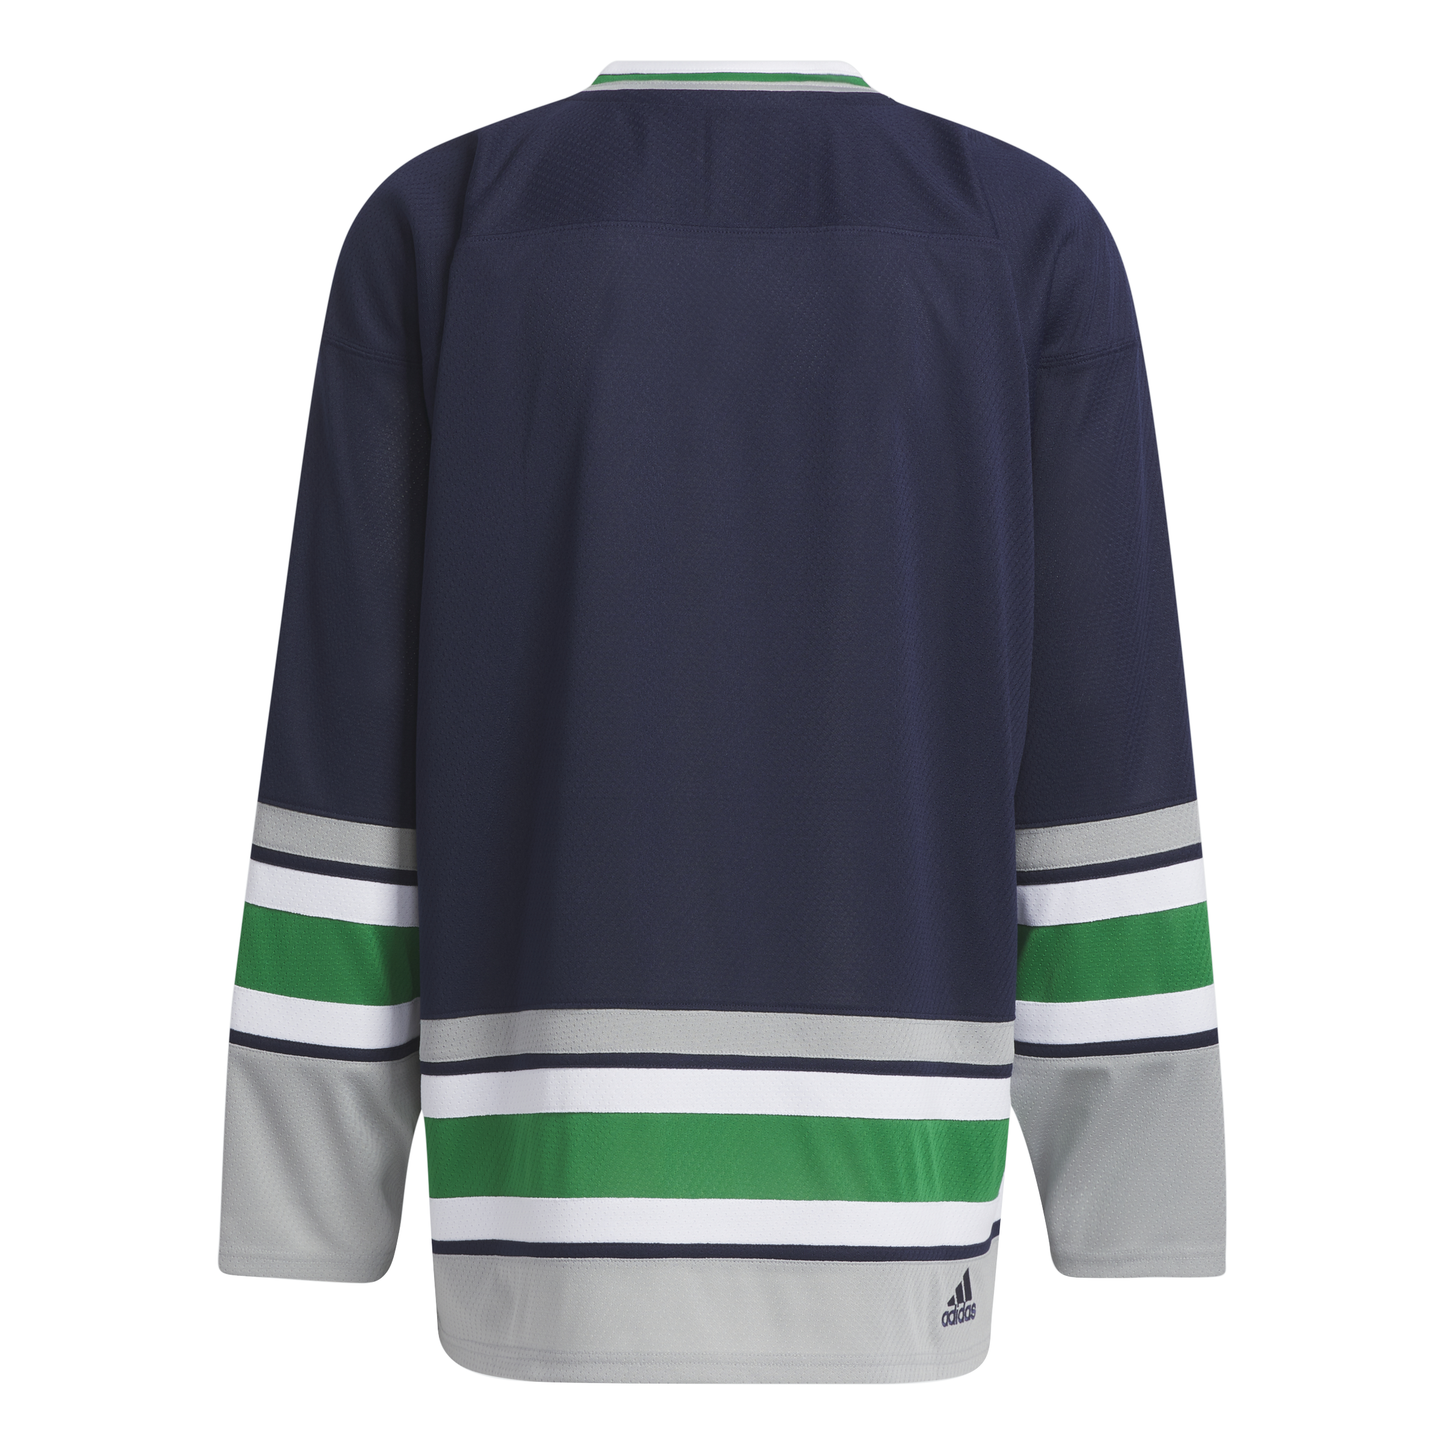 Back View: Navy blue jersey with grey white and green striping.